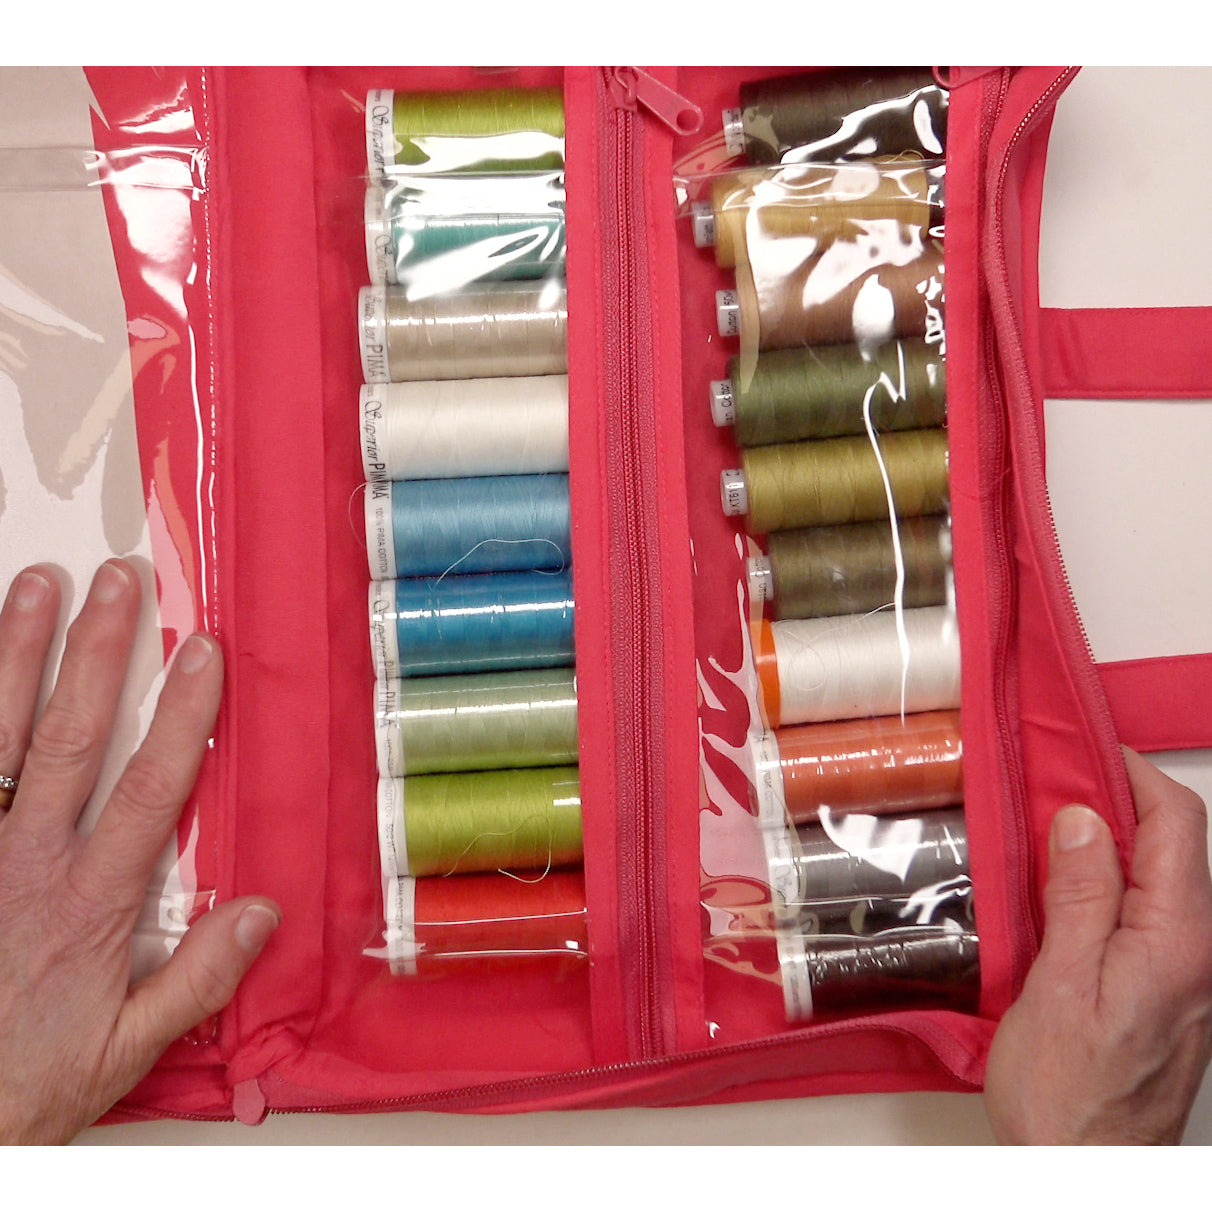 Yazzii Ultimate Thread Organizer (5 color options)